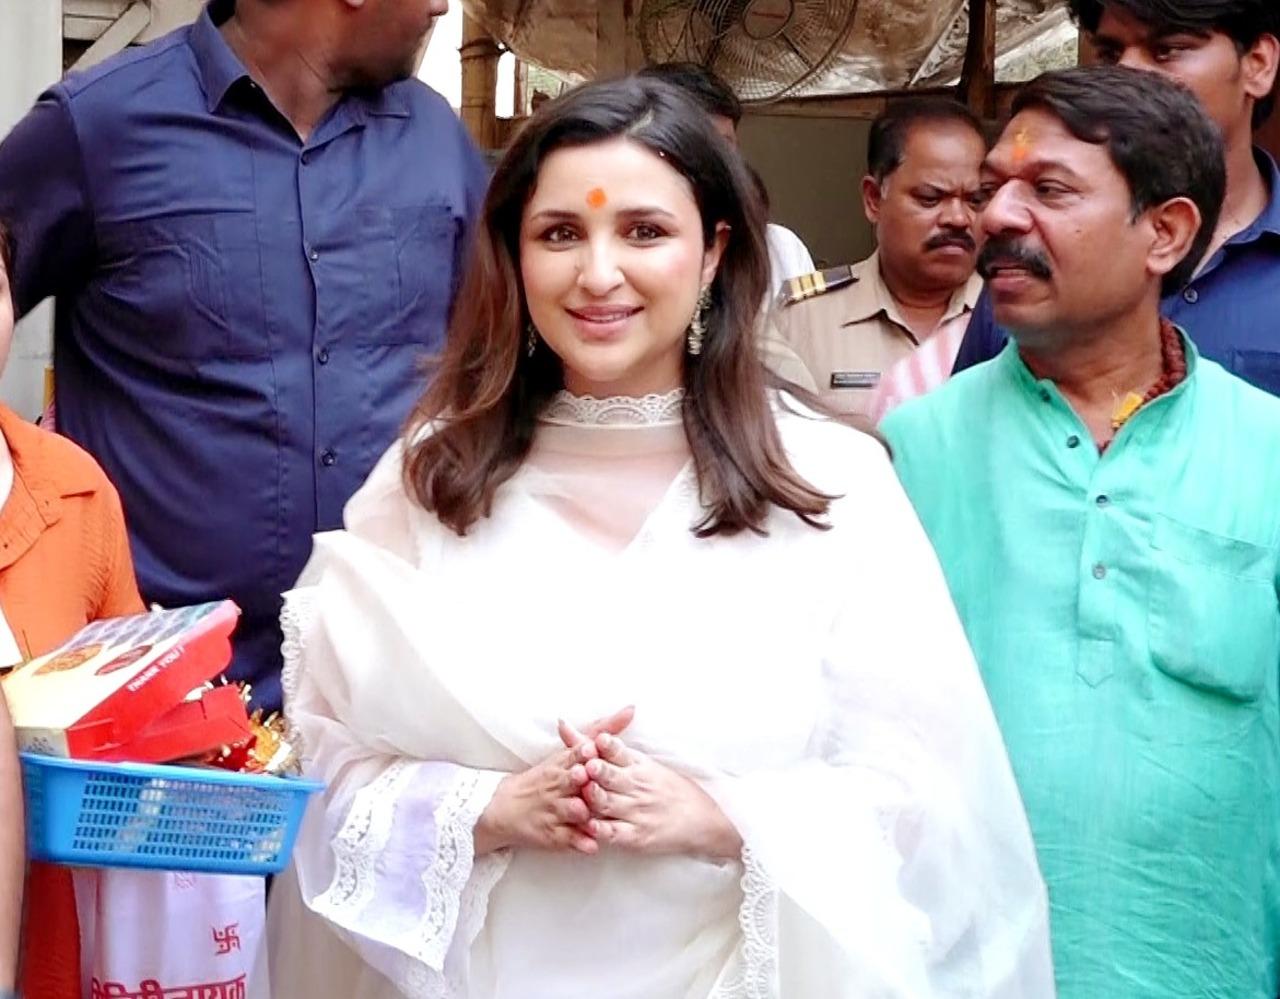 For her visit to the temple, Parineeti wore a pristine white ethnic suit.